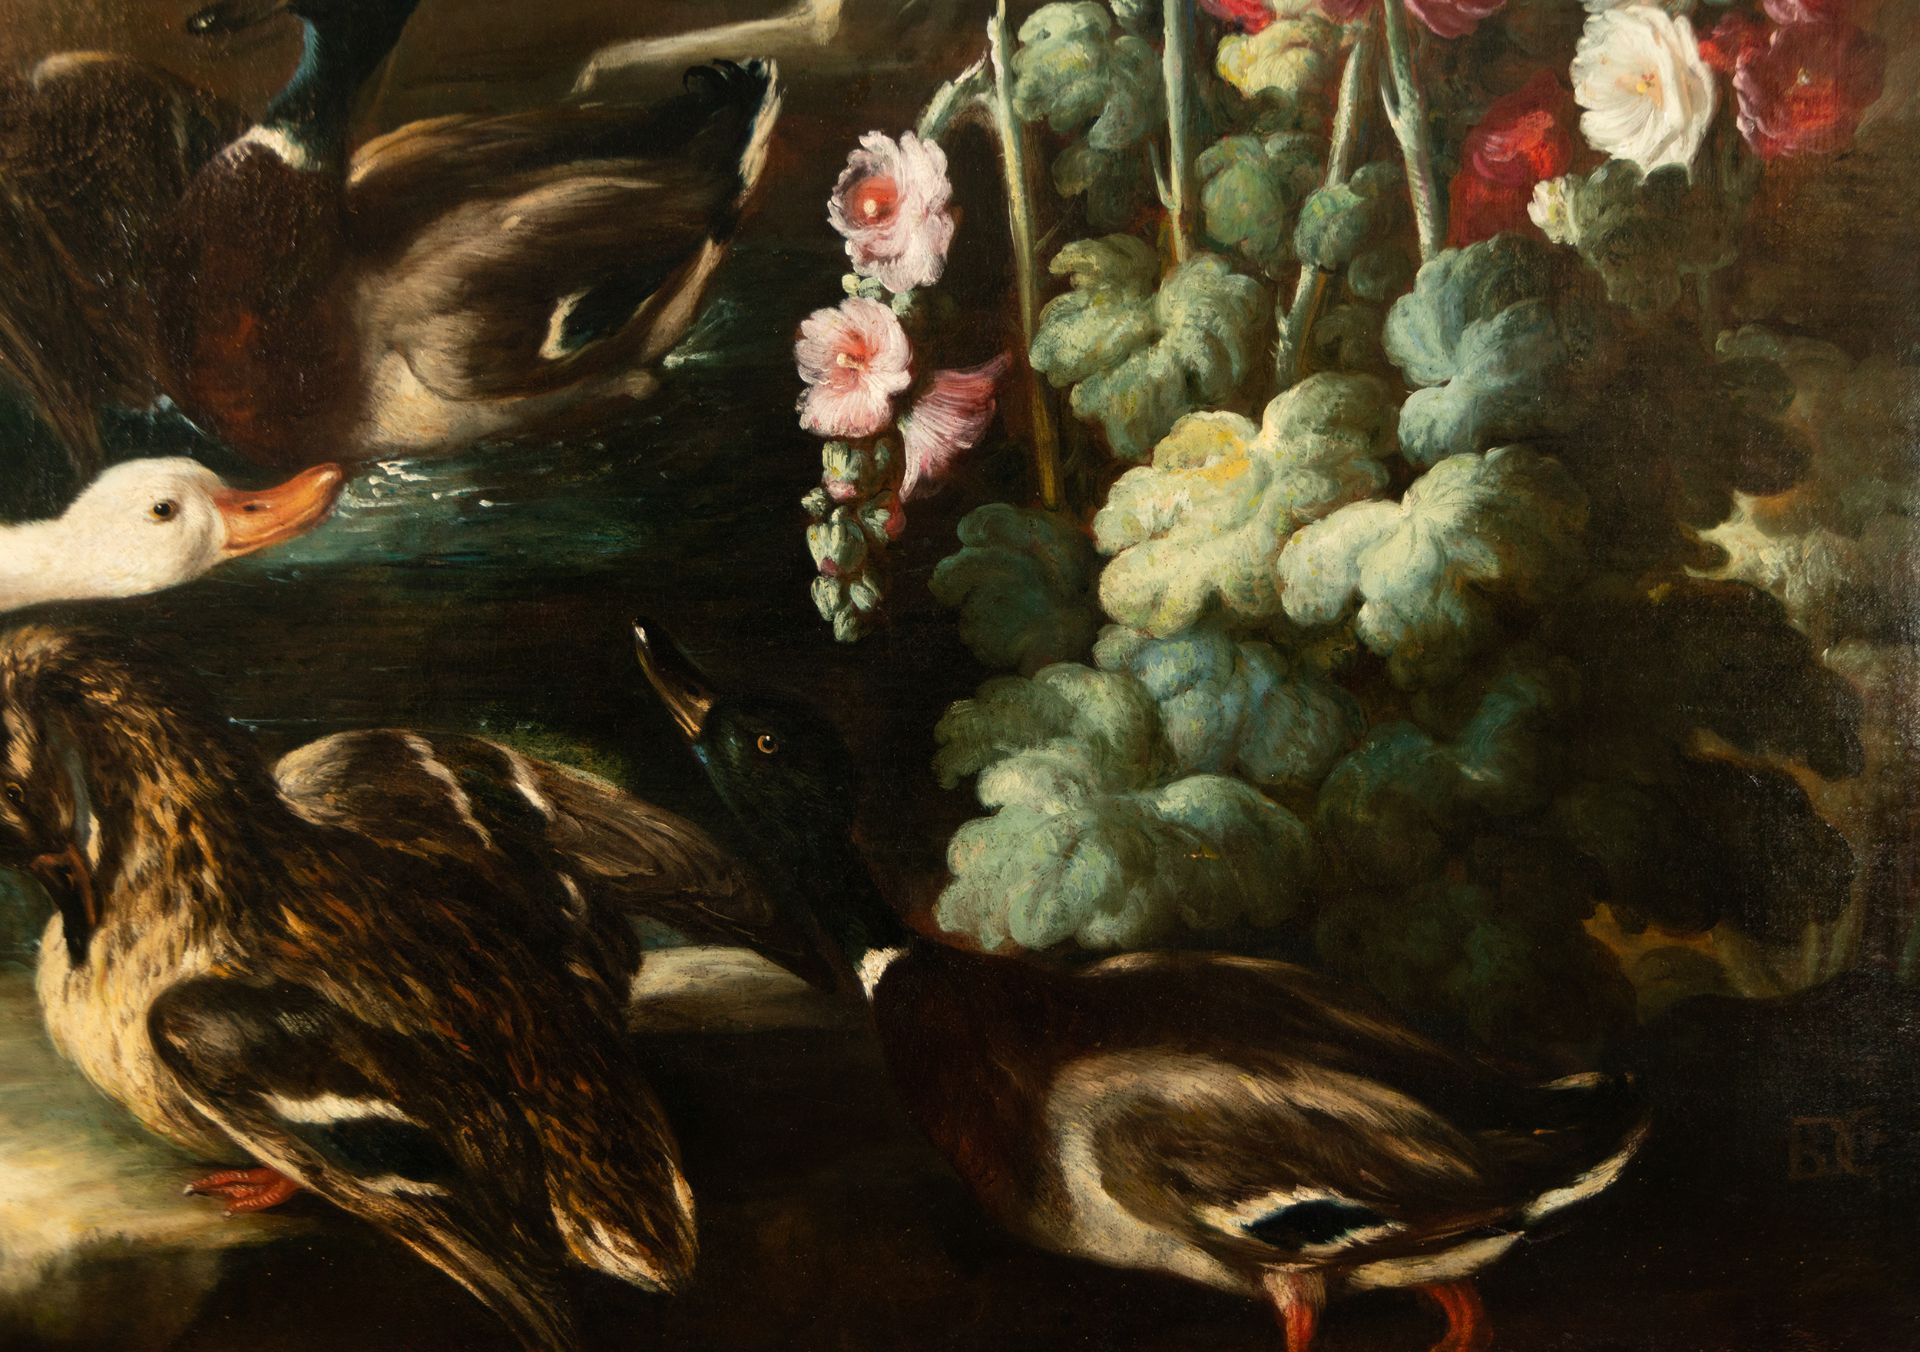 Large Pair of Still Lifes with Flowers and Birds in a Garden, 18th century Neapolitan school, Circle - Image 15 of 17